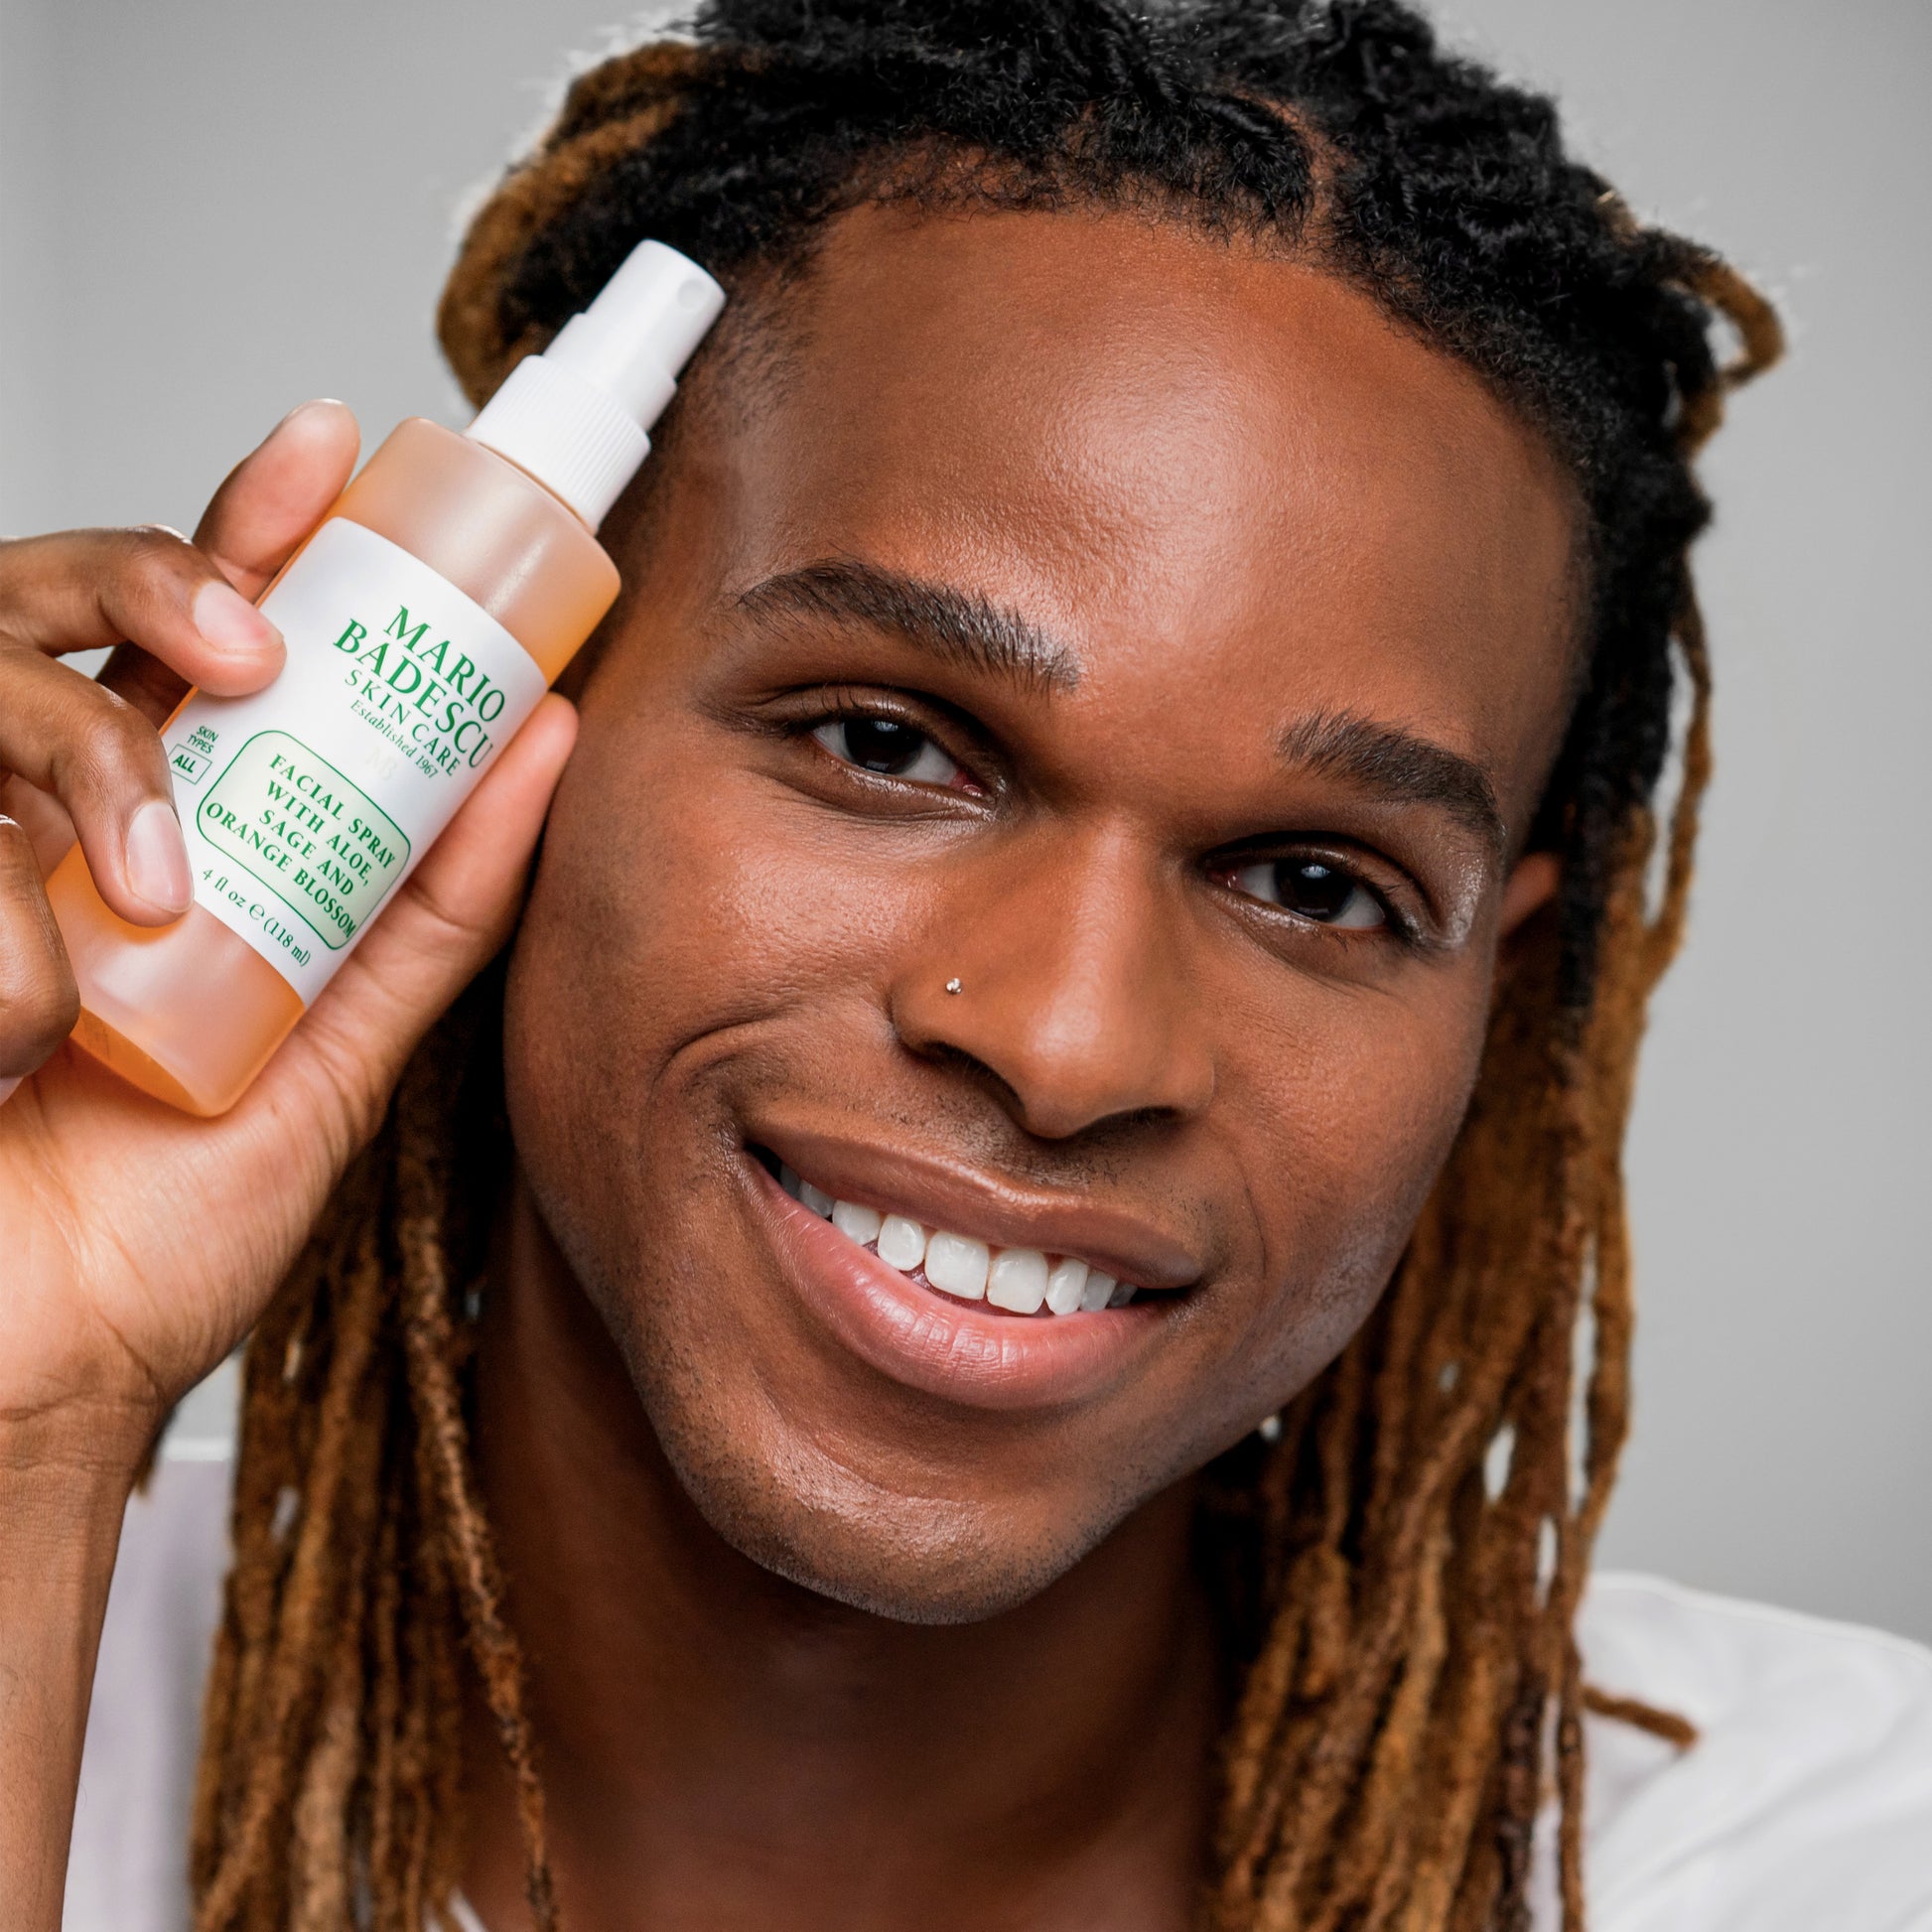 Man with glowing skin holding Facial Spray With Aloe, Sage, Orange Blossom